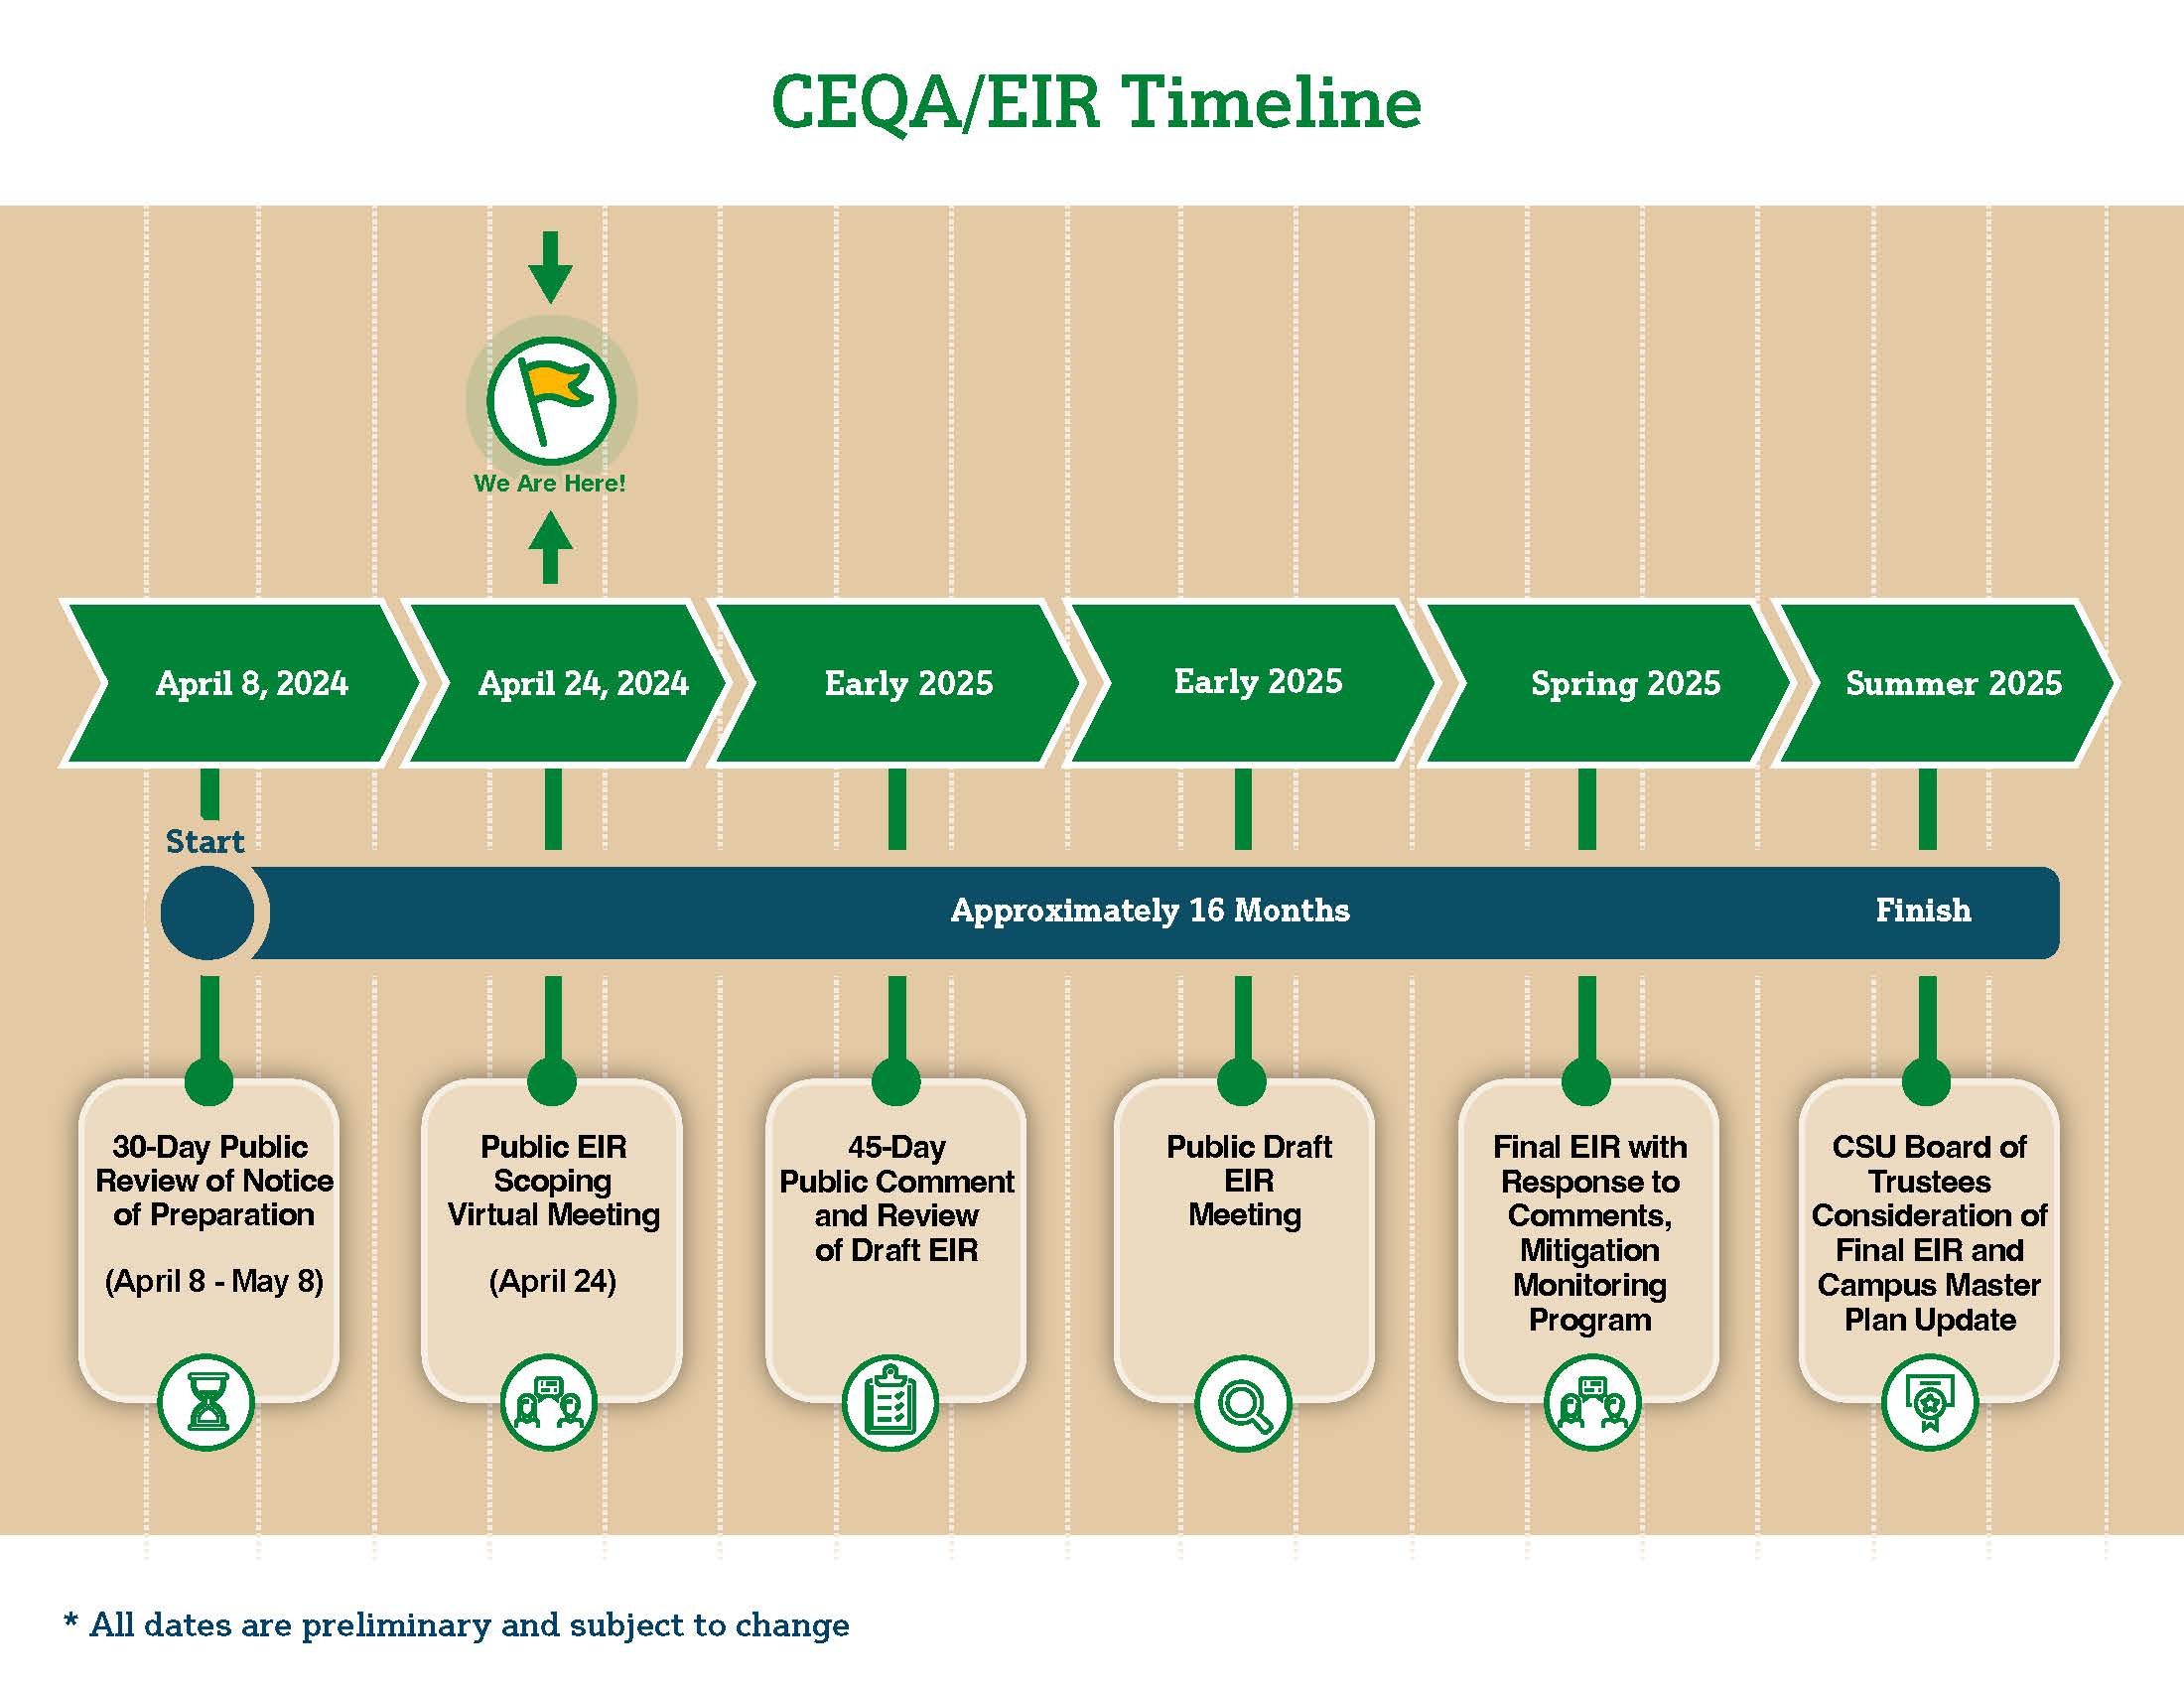 Timeline depicts six major steps towards completion of the CEQA/EIR process which is anticipated to take approximately 16-18 months from start to finish.  An arrow shows the Public EIR Scoping Meeting to be held on April 24, 2024, during the 30-day public review of a Notice of Preparation beginning on April 8 to May 8, 2024.